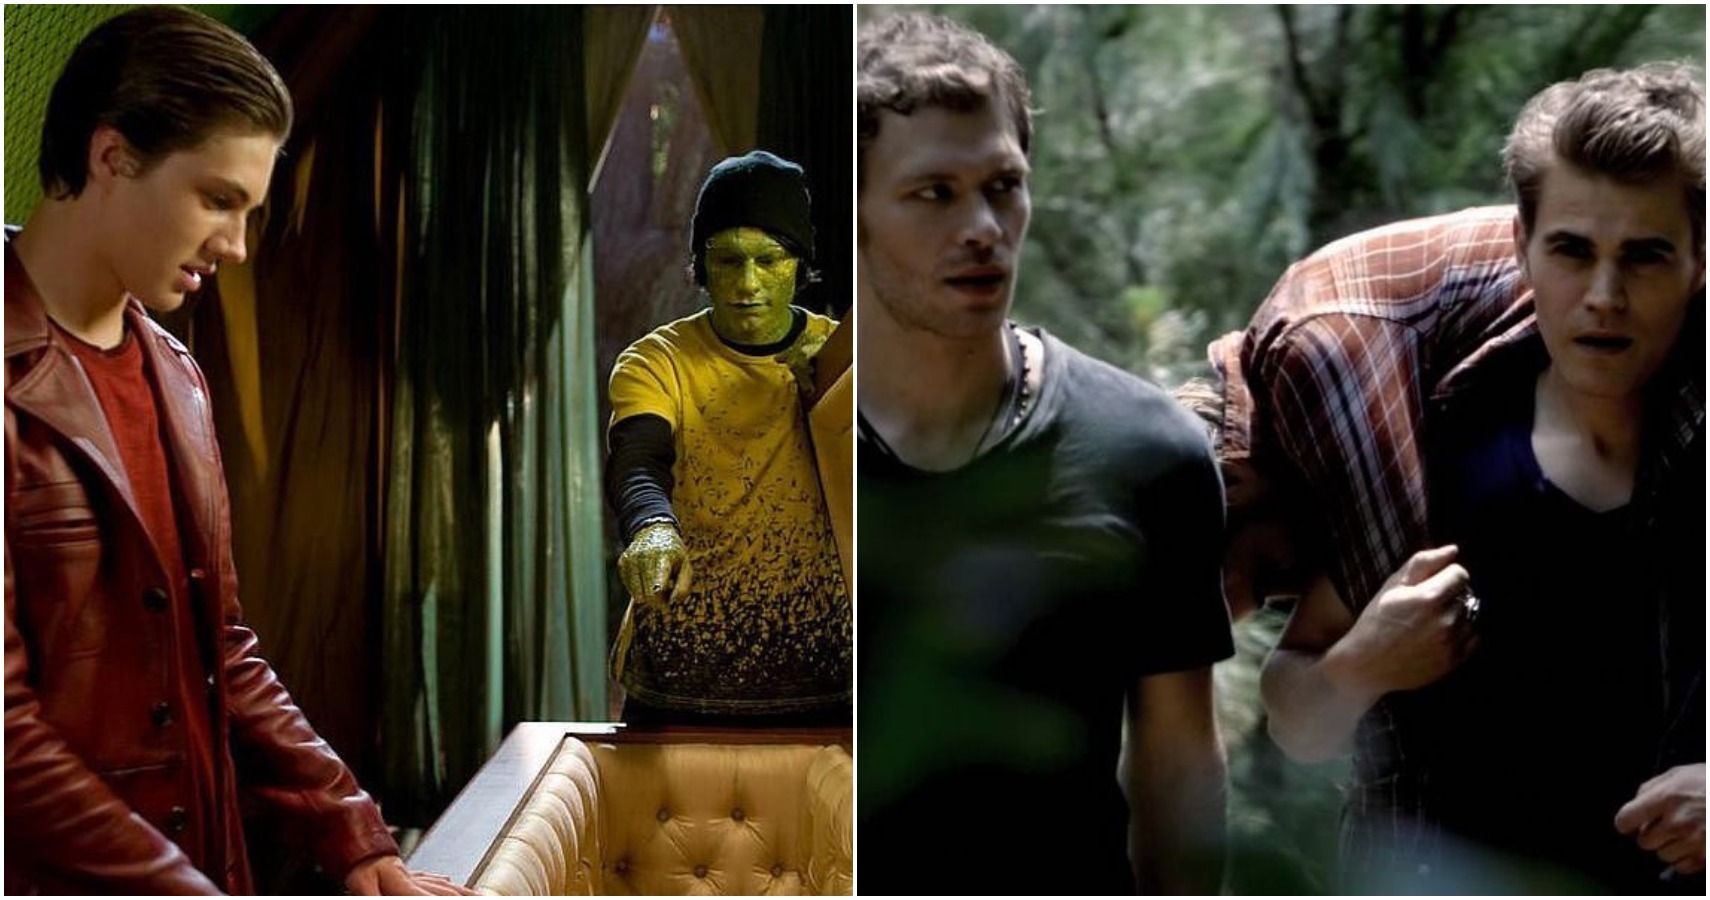 Cirque Du Freak: The Vampire's Assistant Darren and Evra, The Vampire Diaries Klaus and Stefan